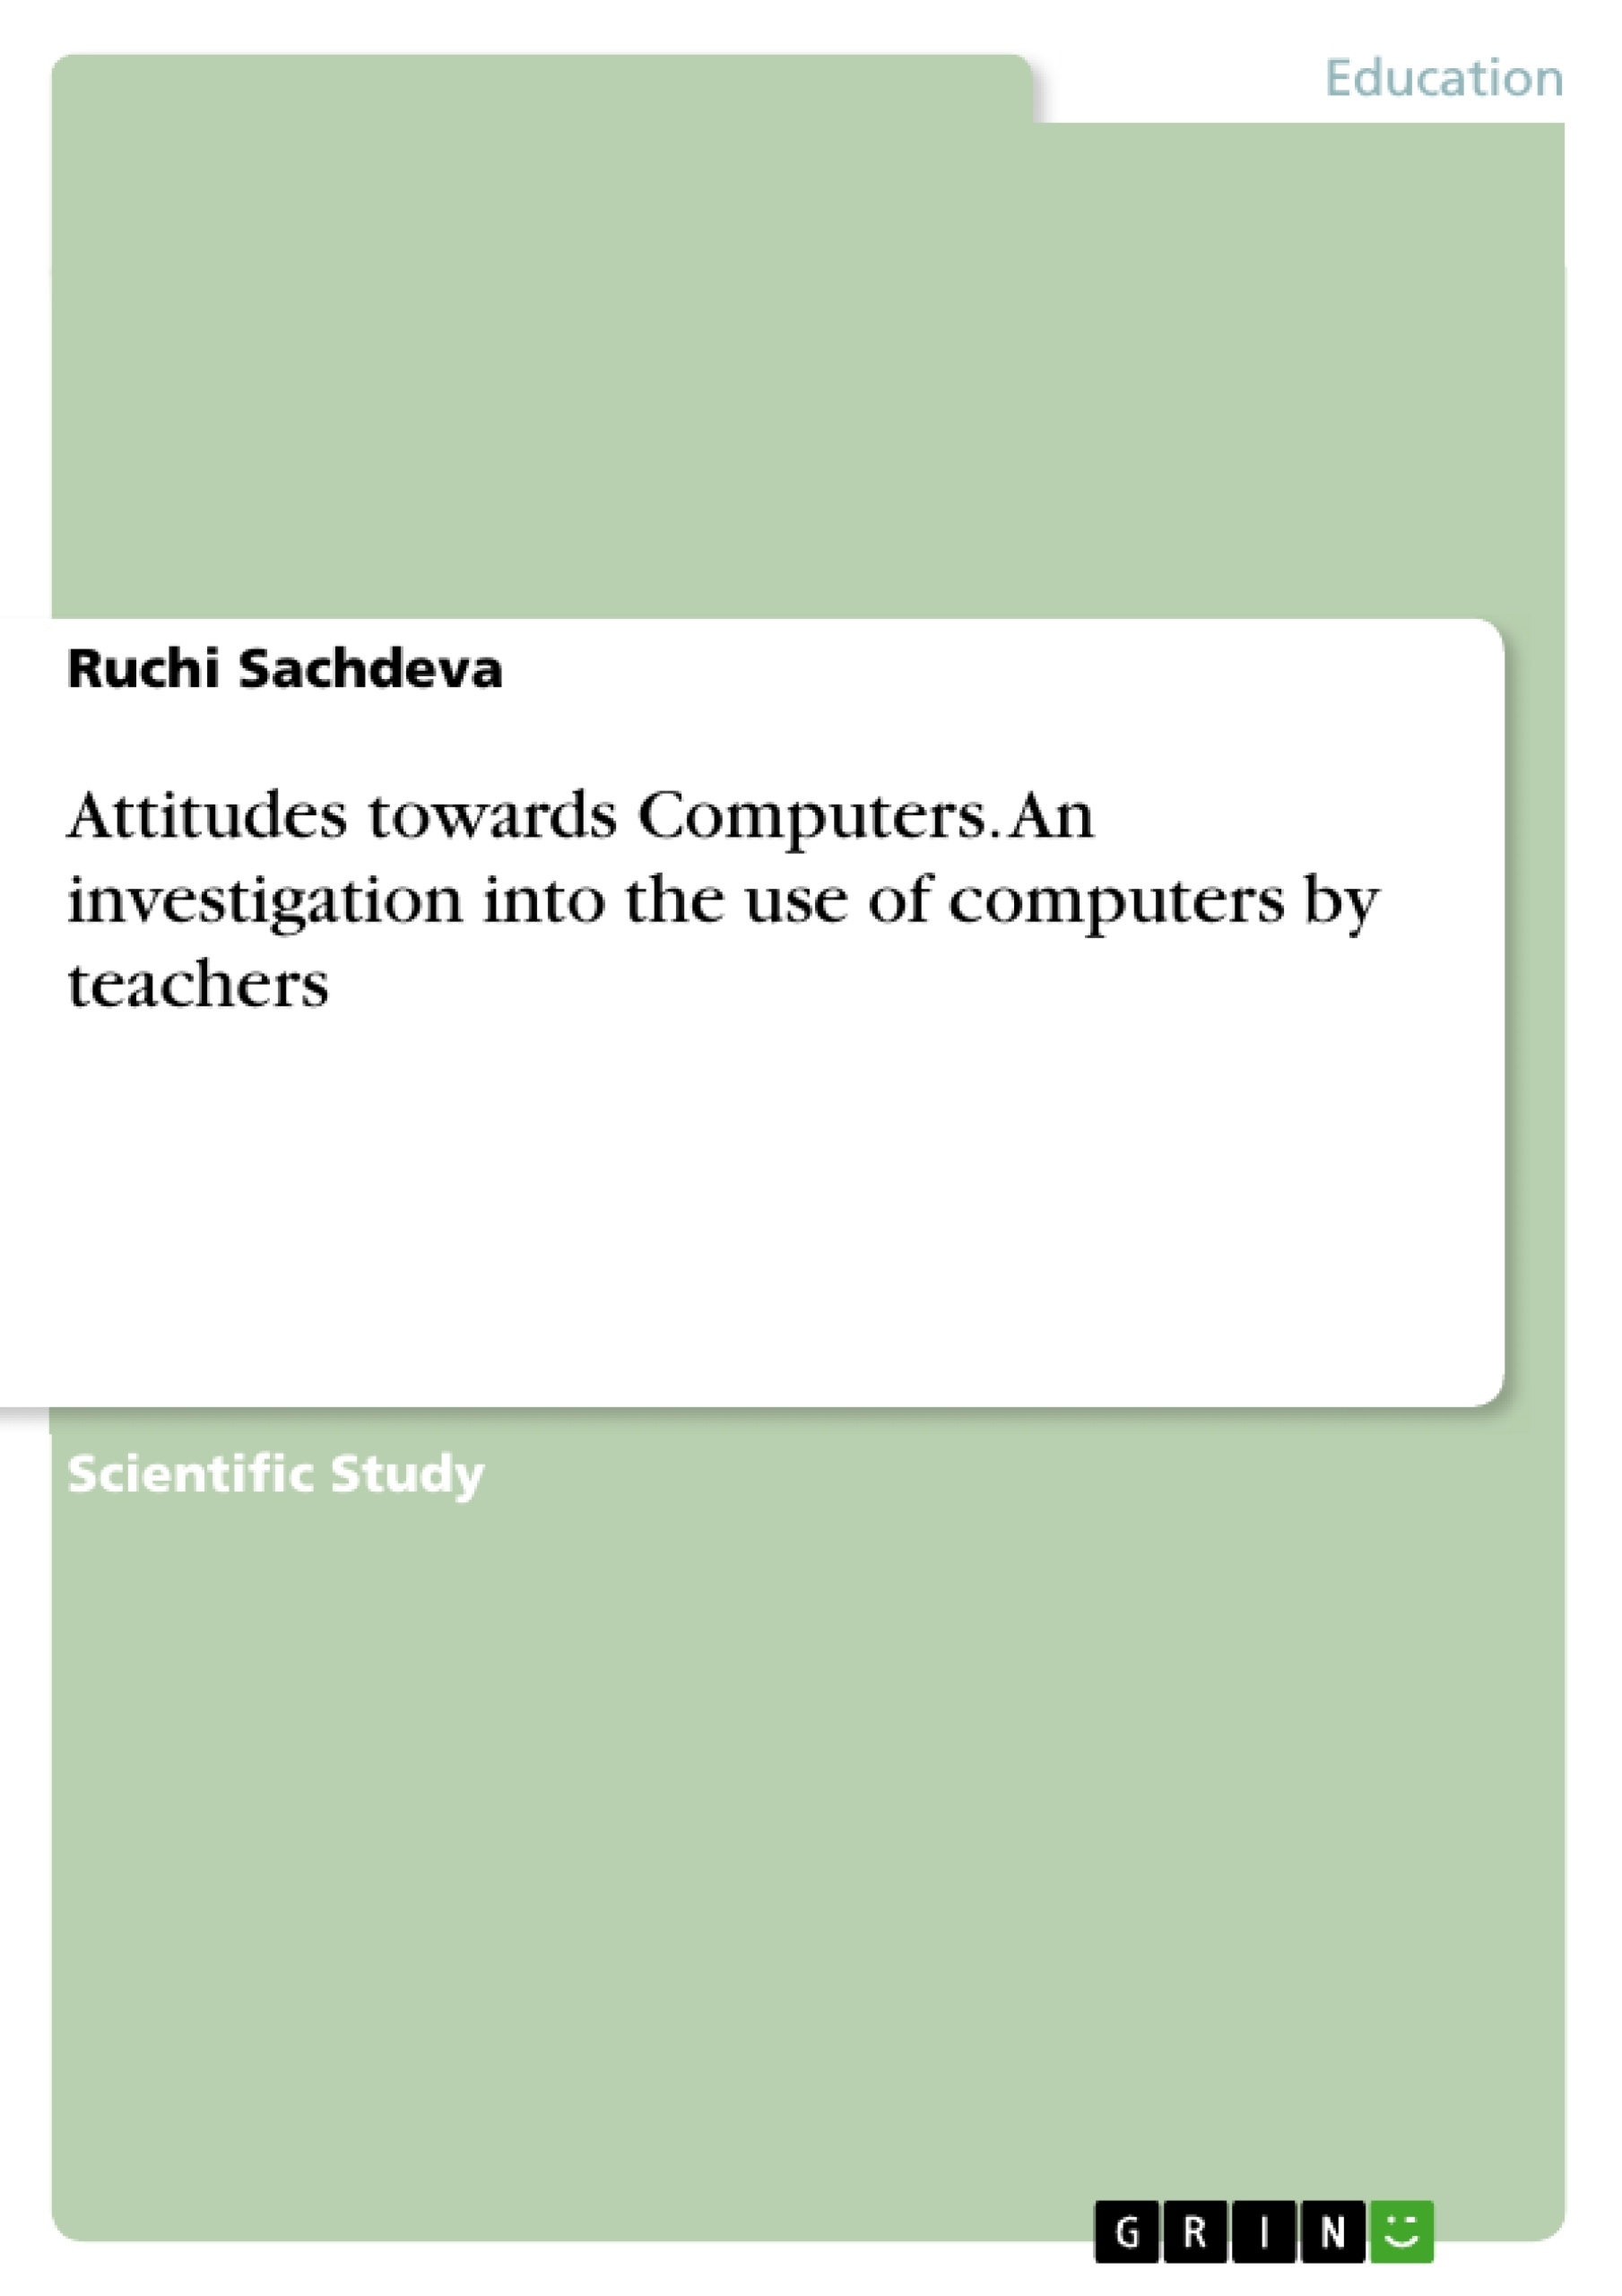 Título: Attitudes towards Computers. An investigation into the use of computers by teachers